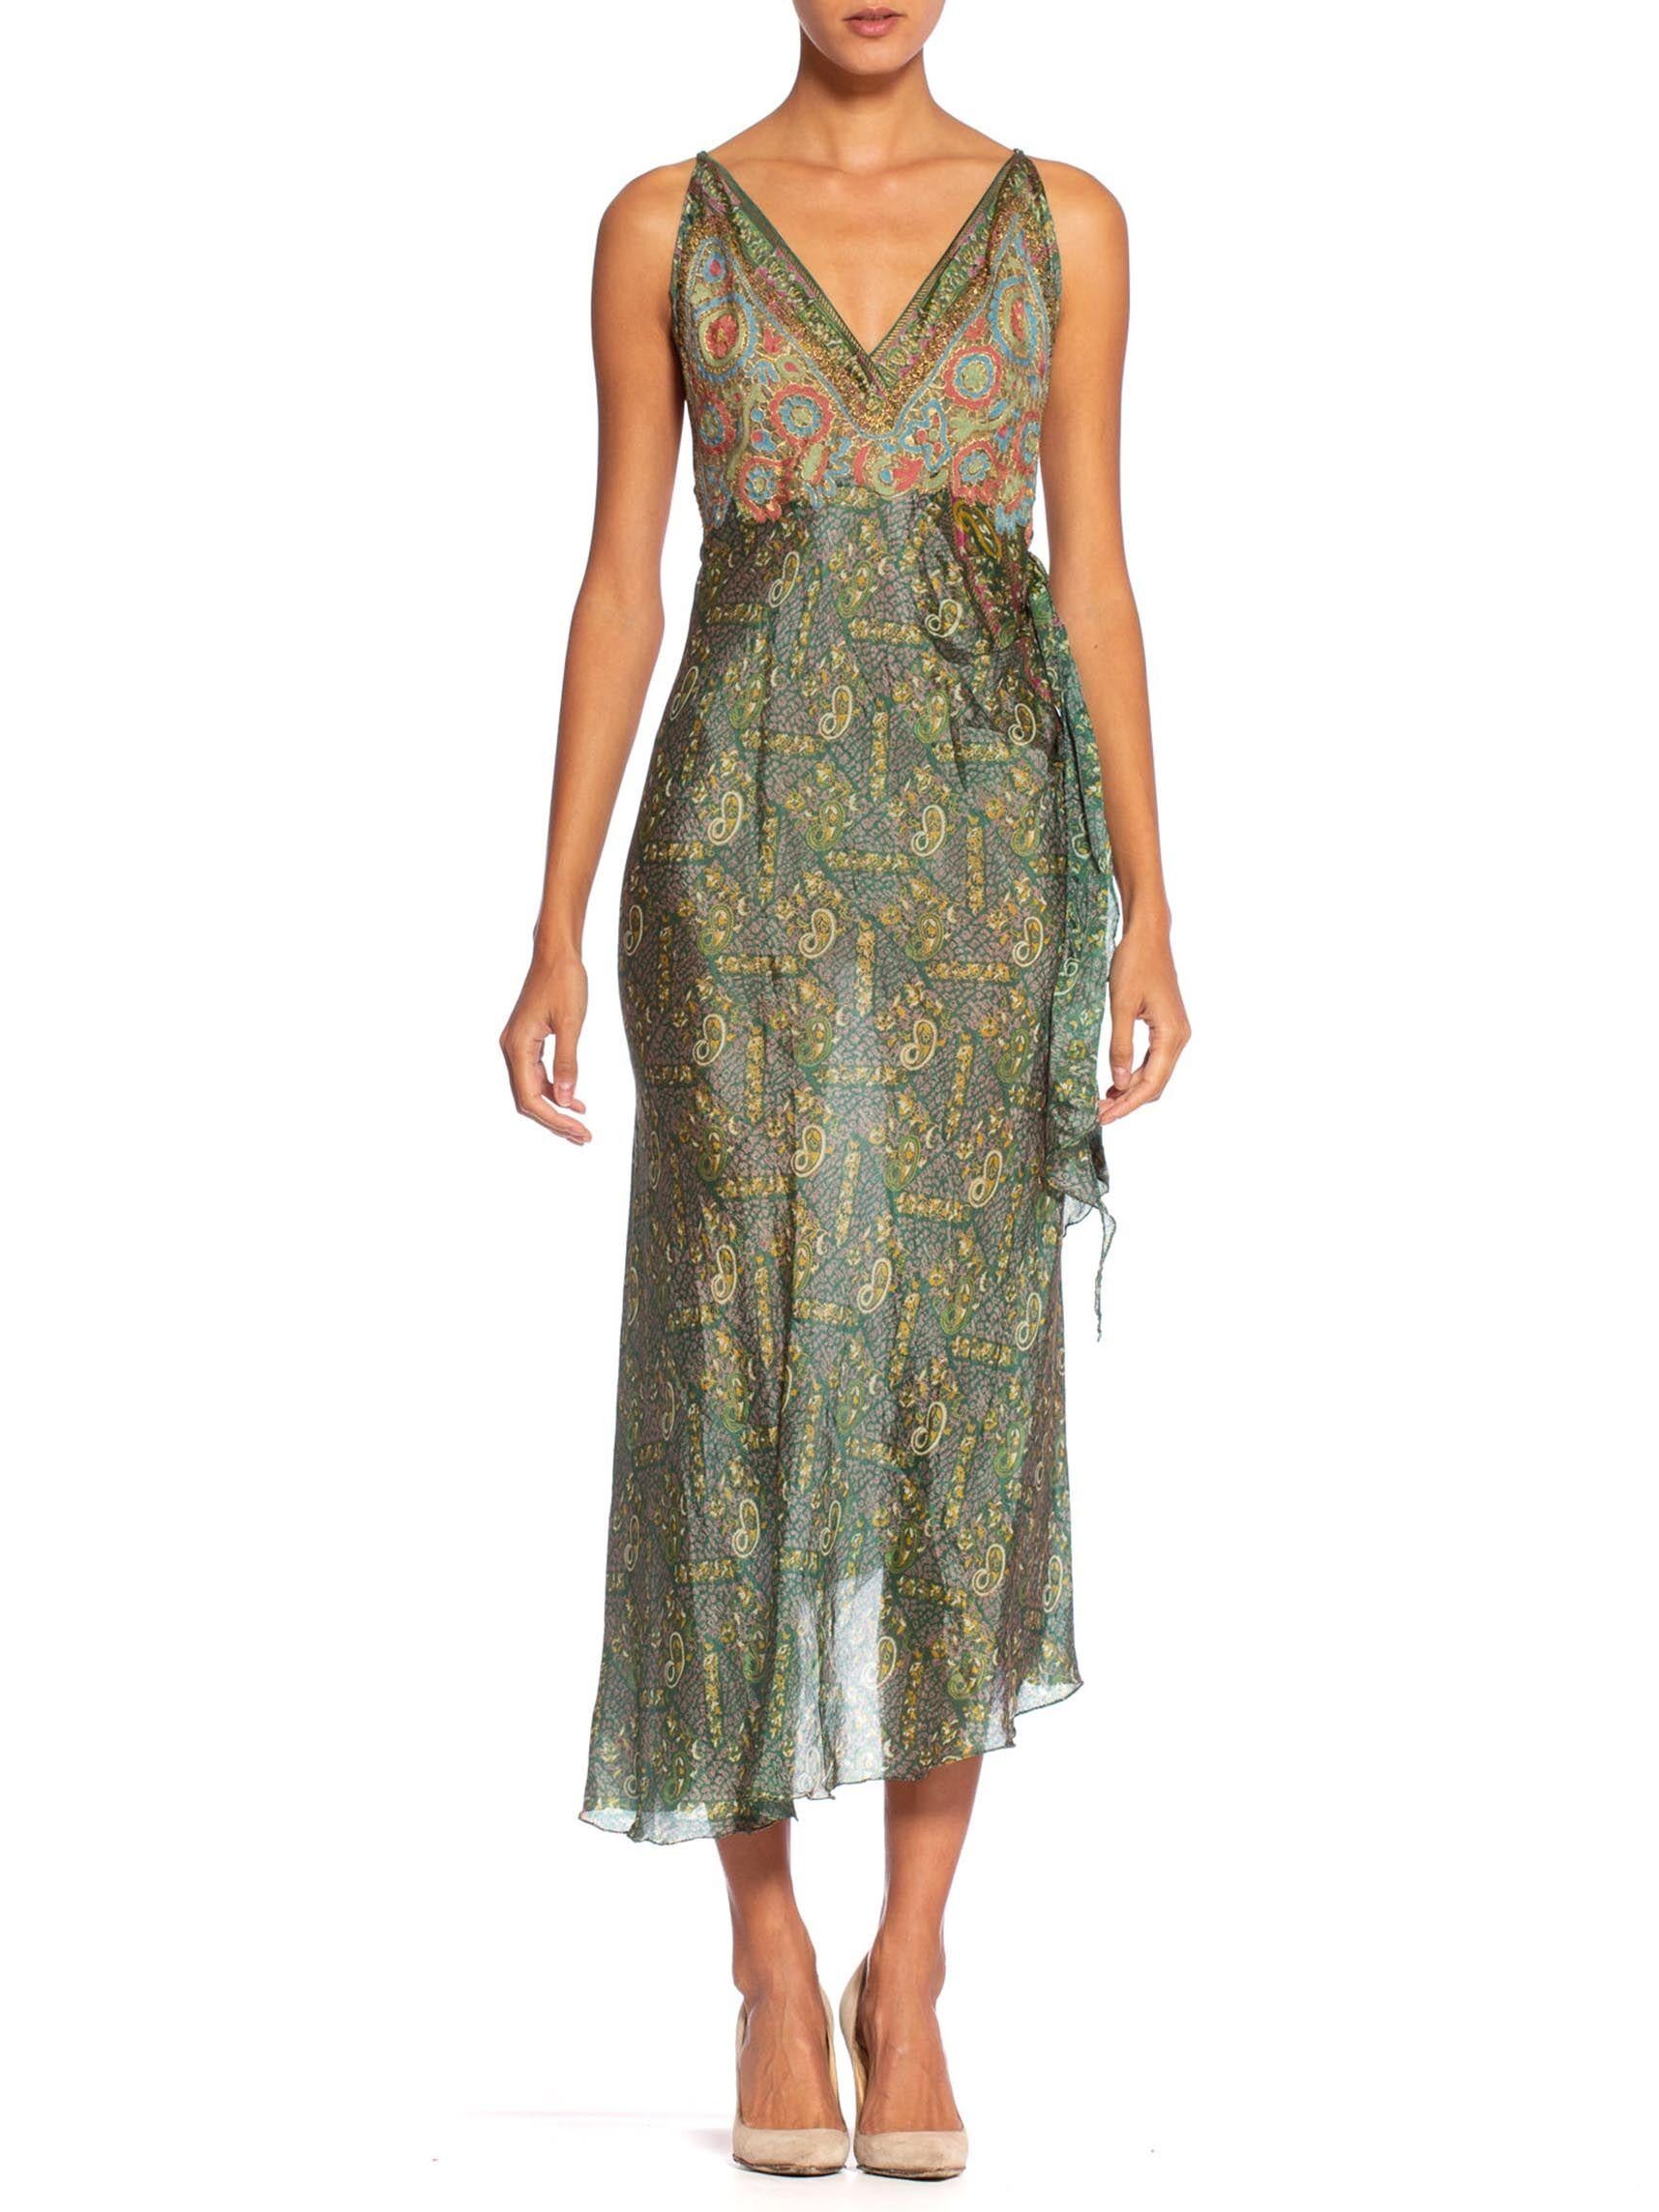 Morphew Collection Bias Backless Indian Print Dress With Edwardian Metallic Embroidery